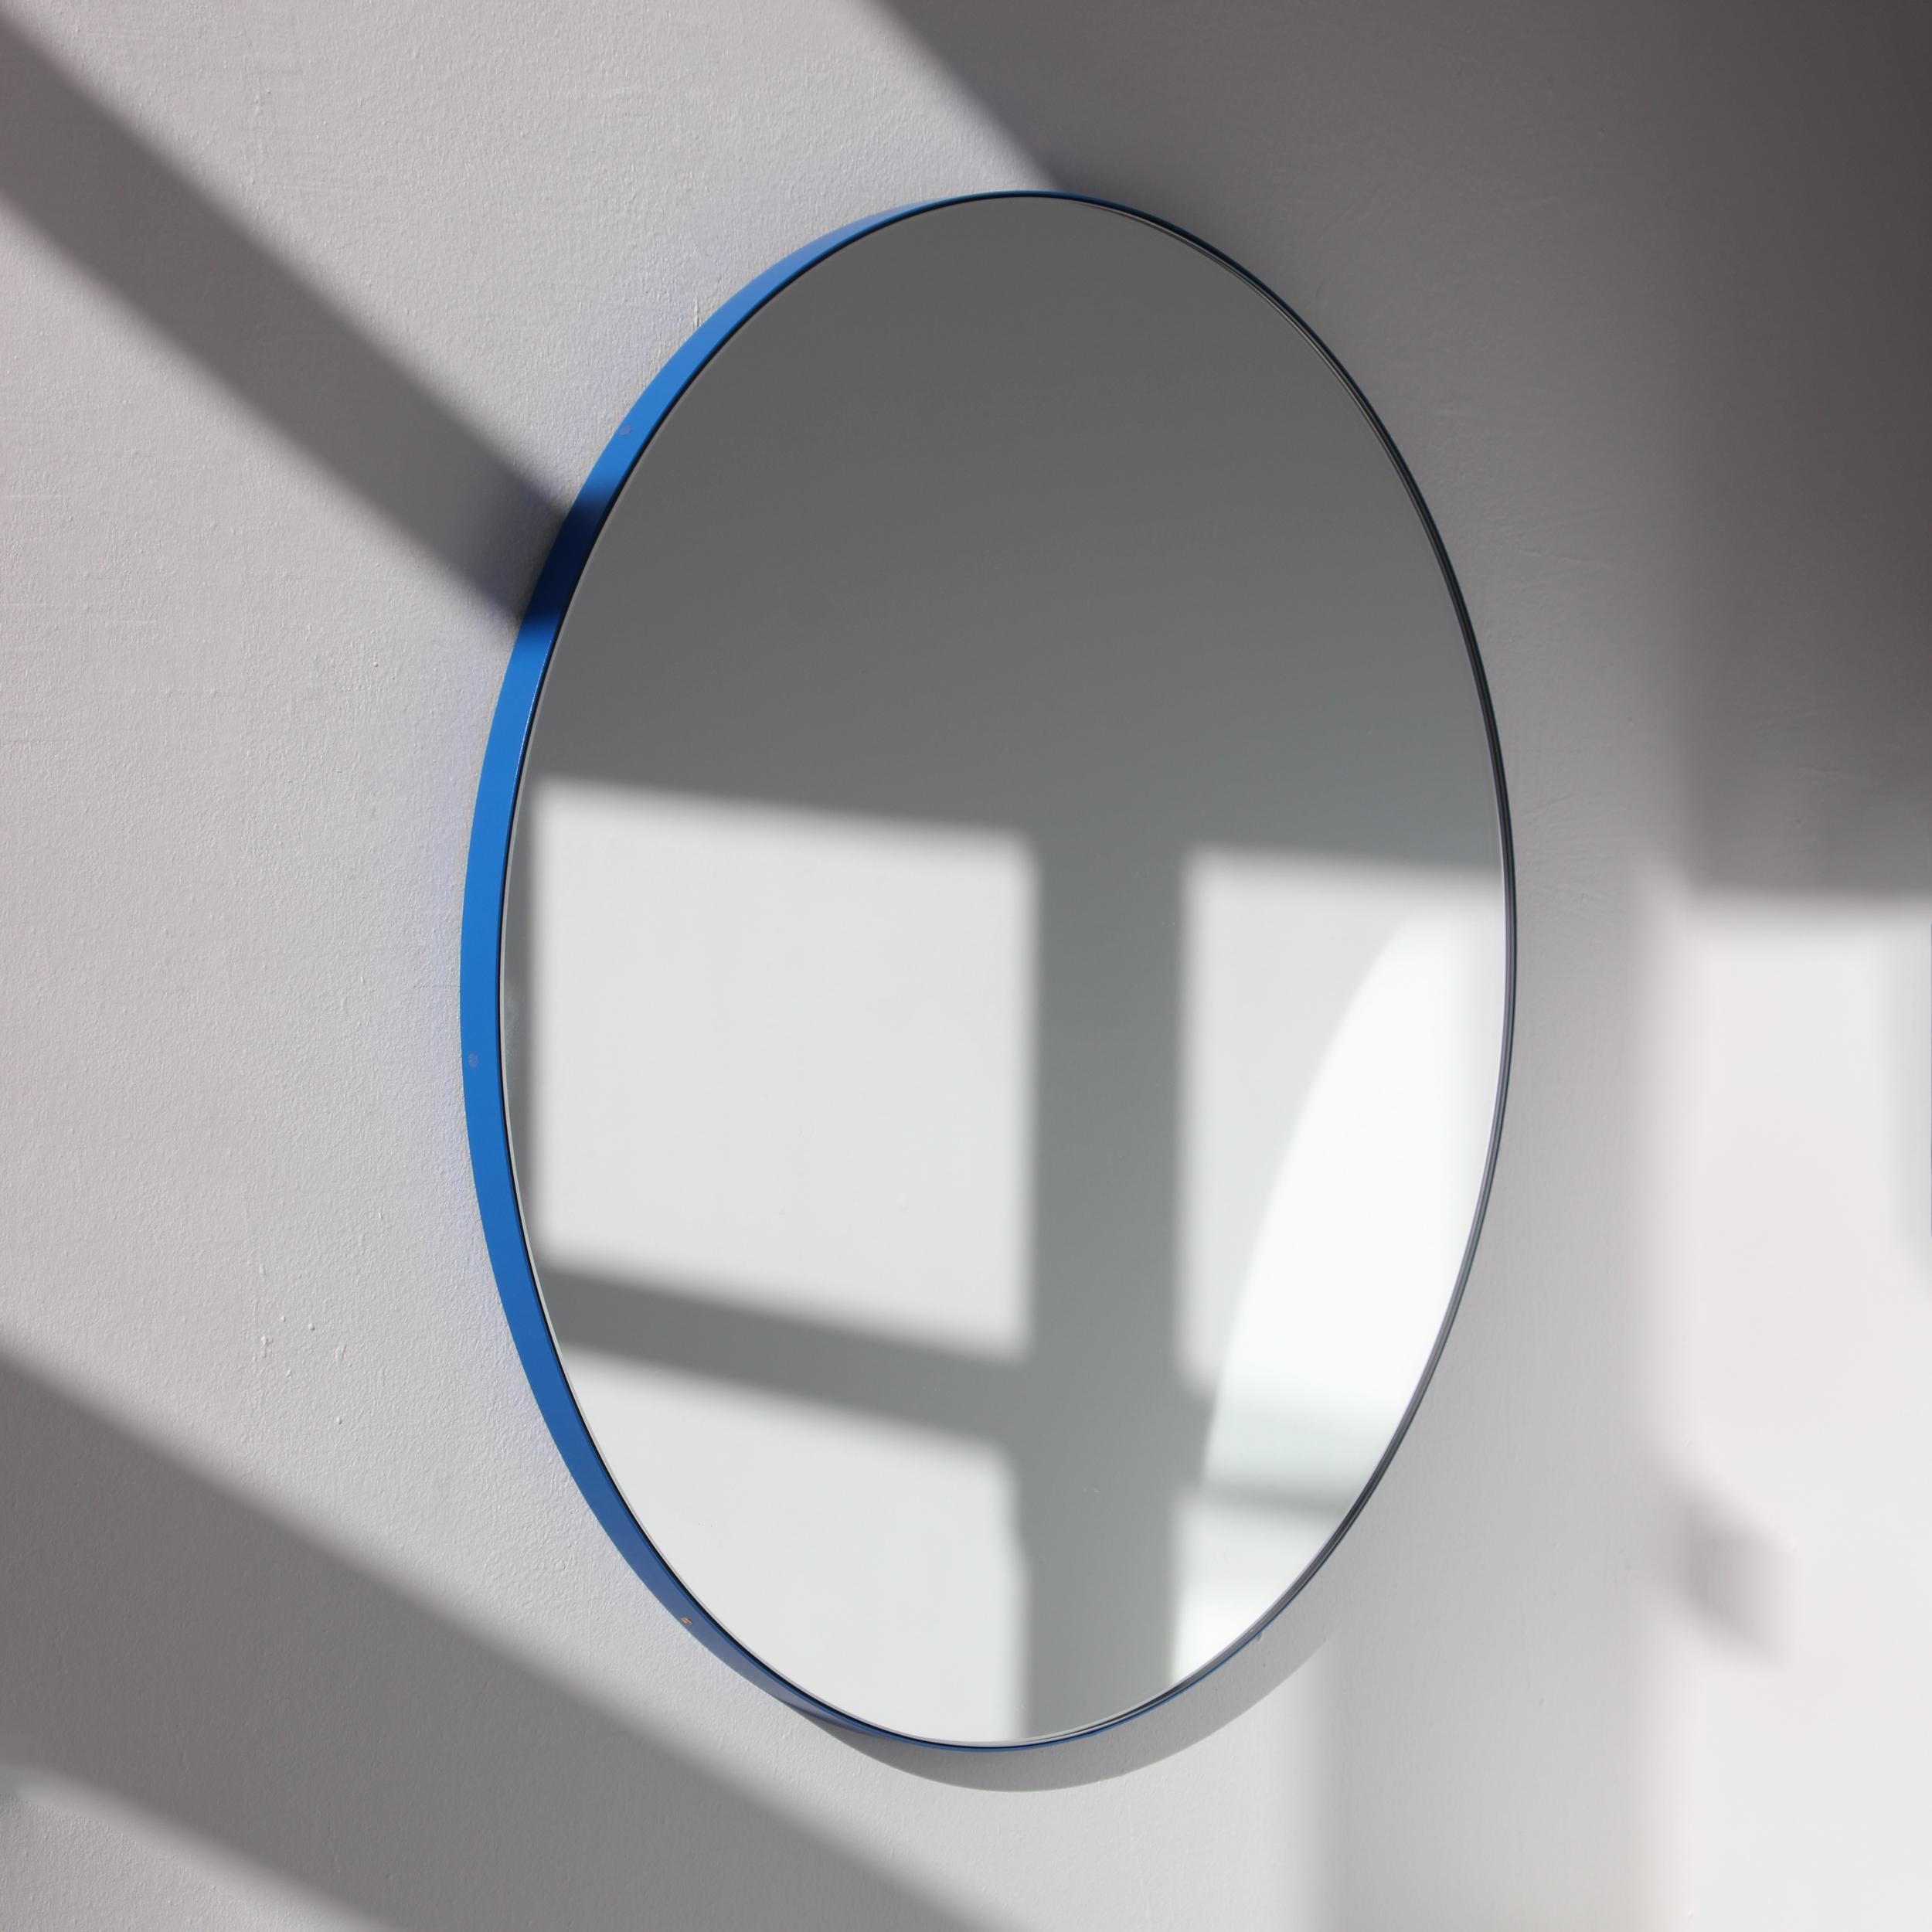 Minimalist round mirror with a modern aluminium powder coated blue frame. Designed and handcrafted in London, UK.

Our mirrors are designed with an integrated French cleat (split batten) system that ensures the mirror is securely mounted flush with